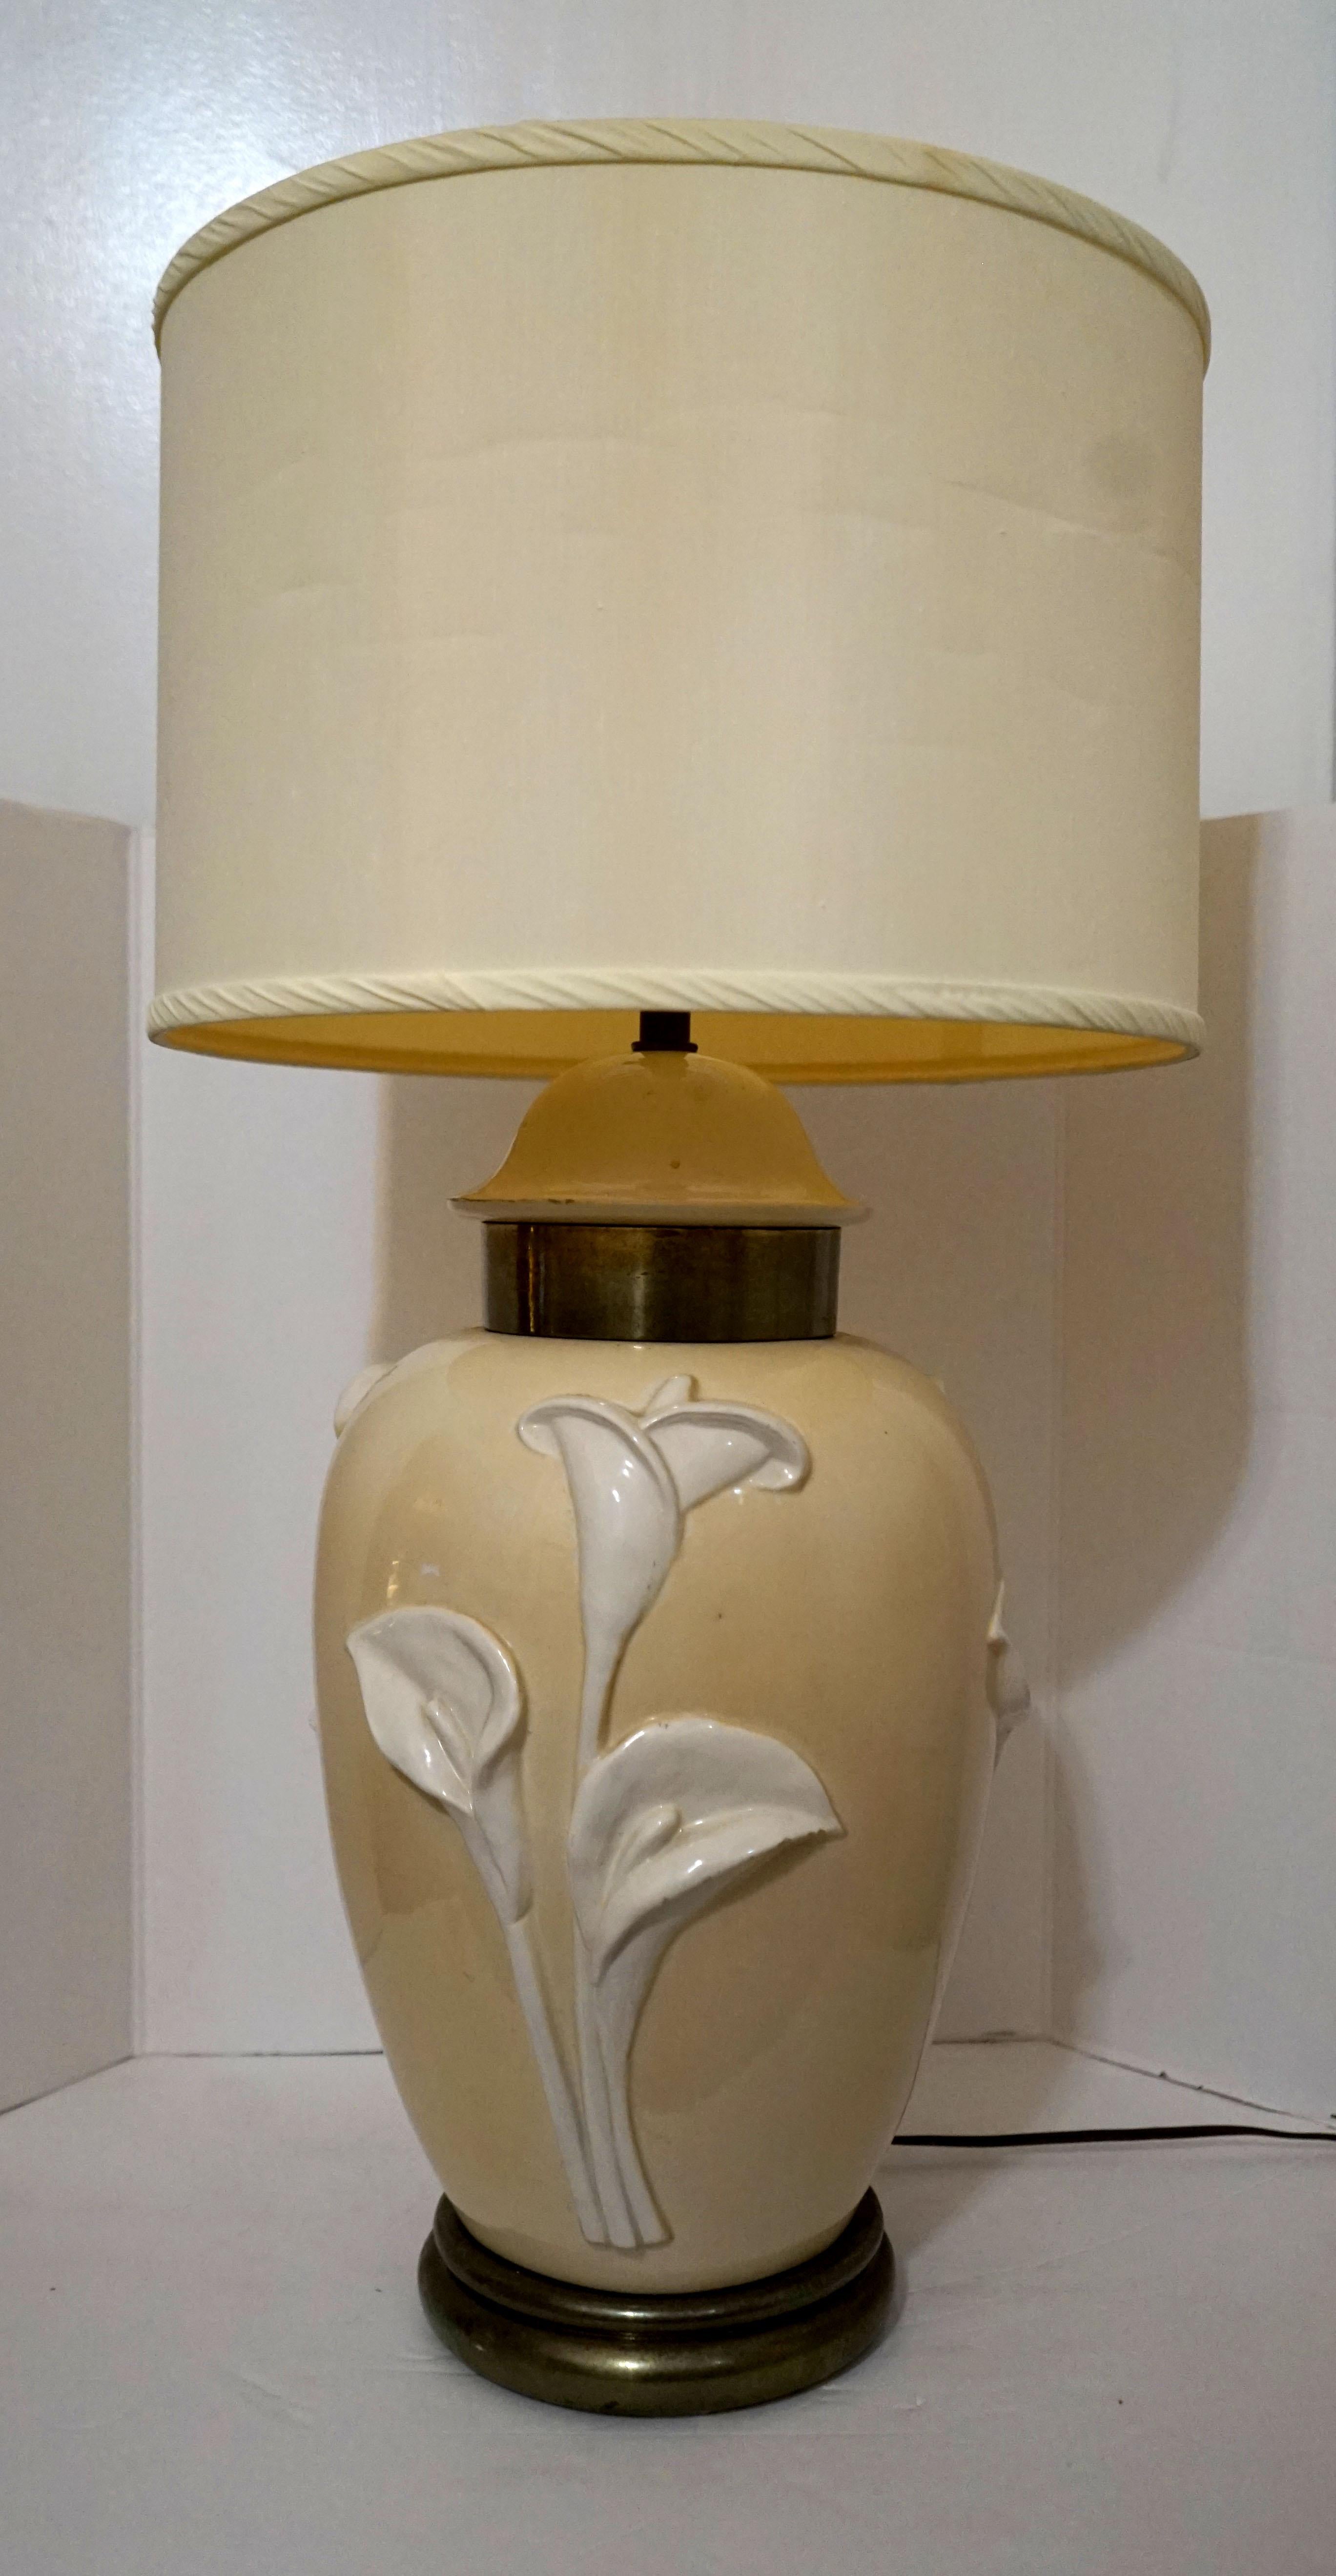 Craftsmanship and the color palette of cream and tan create a calming effect in this Chapman Manufacturing table lamp from 1979. At 31 inches tall, it has a presence that is accented by the sculptural lilies that are on both sides of the piece. The